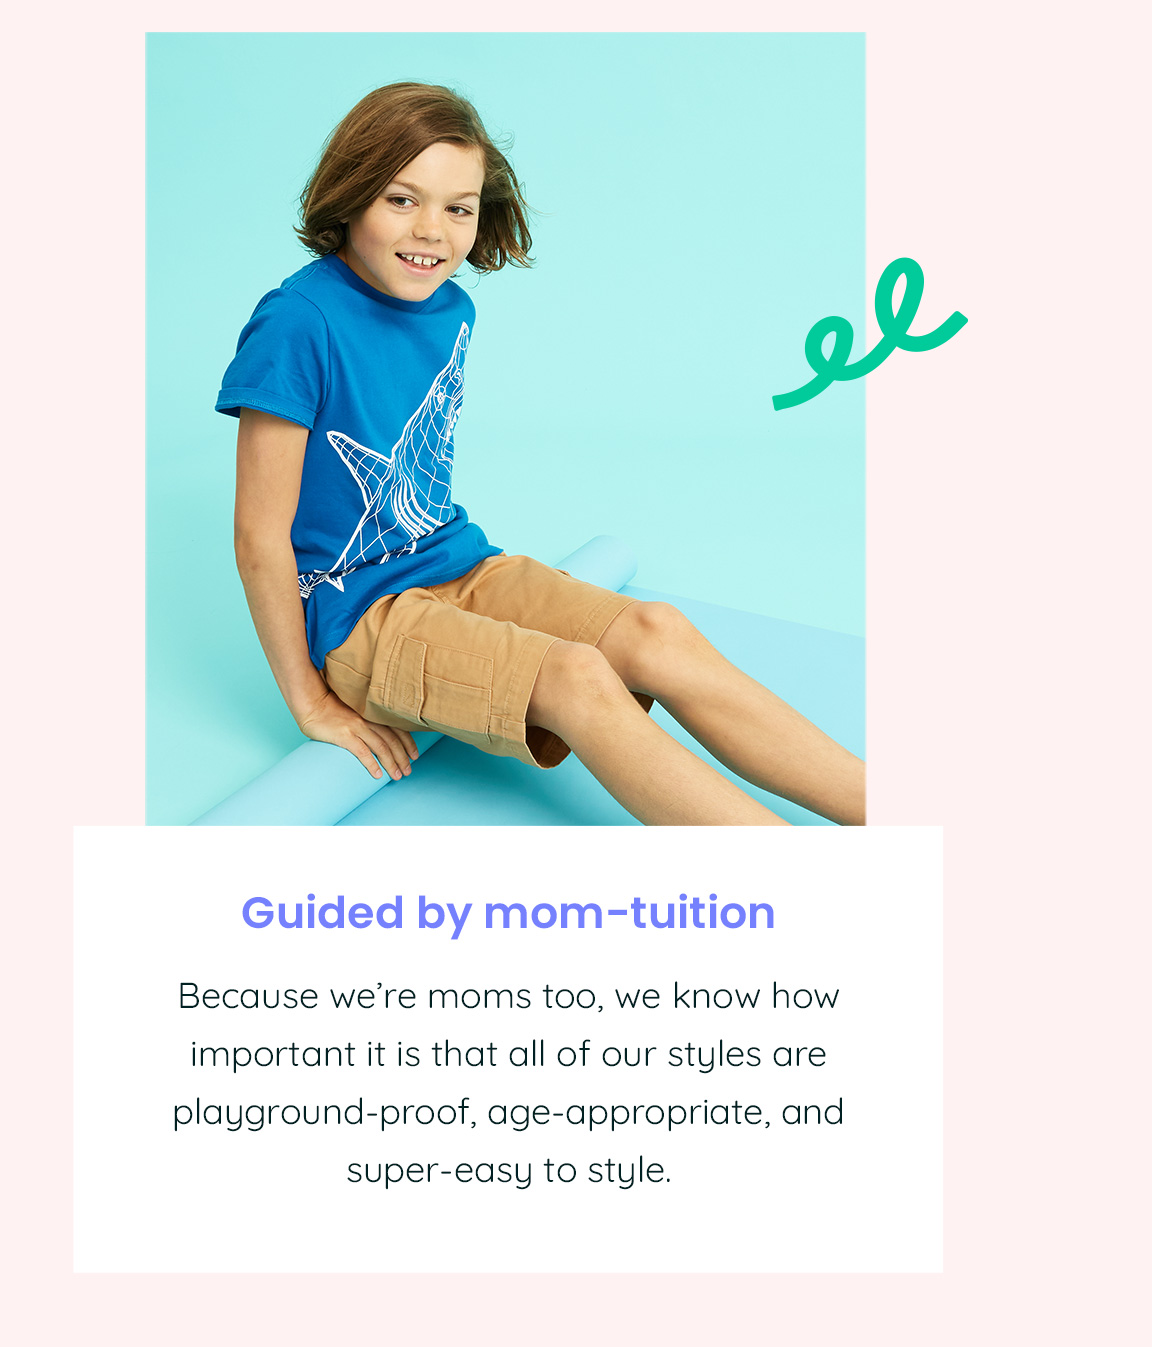 Guided by mom-tuition - Because we're moms too, we know how important it is that all of our styles are playground-proof, age-appropriate, and super-easy to style.